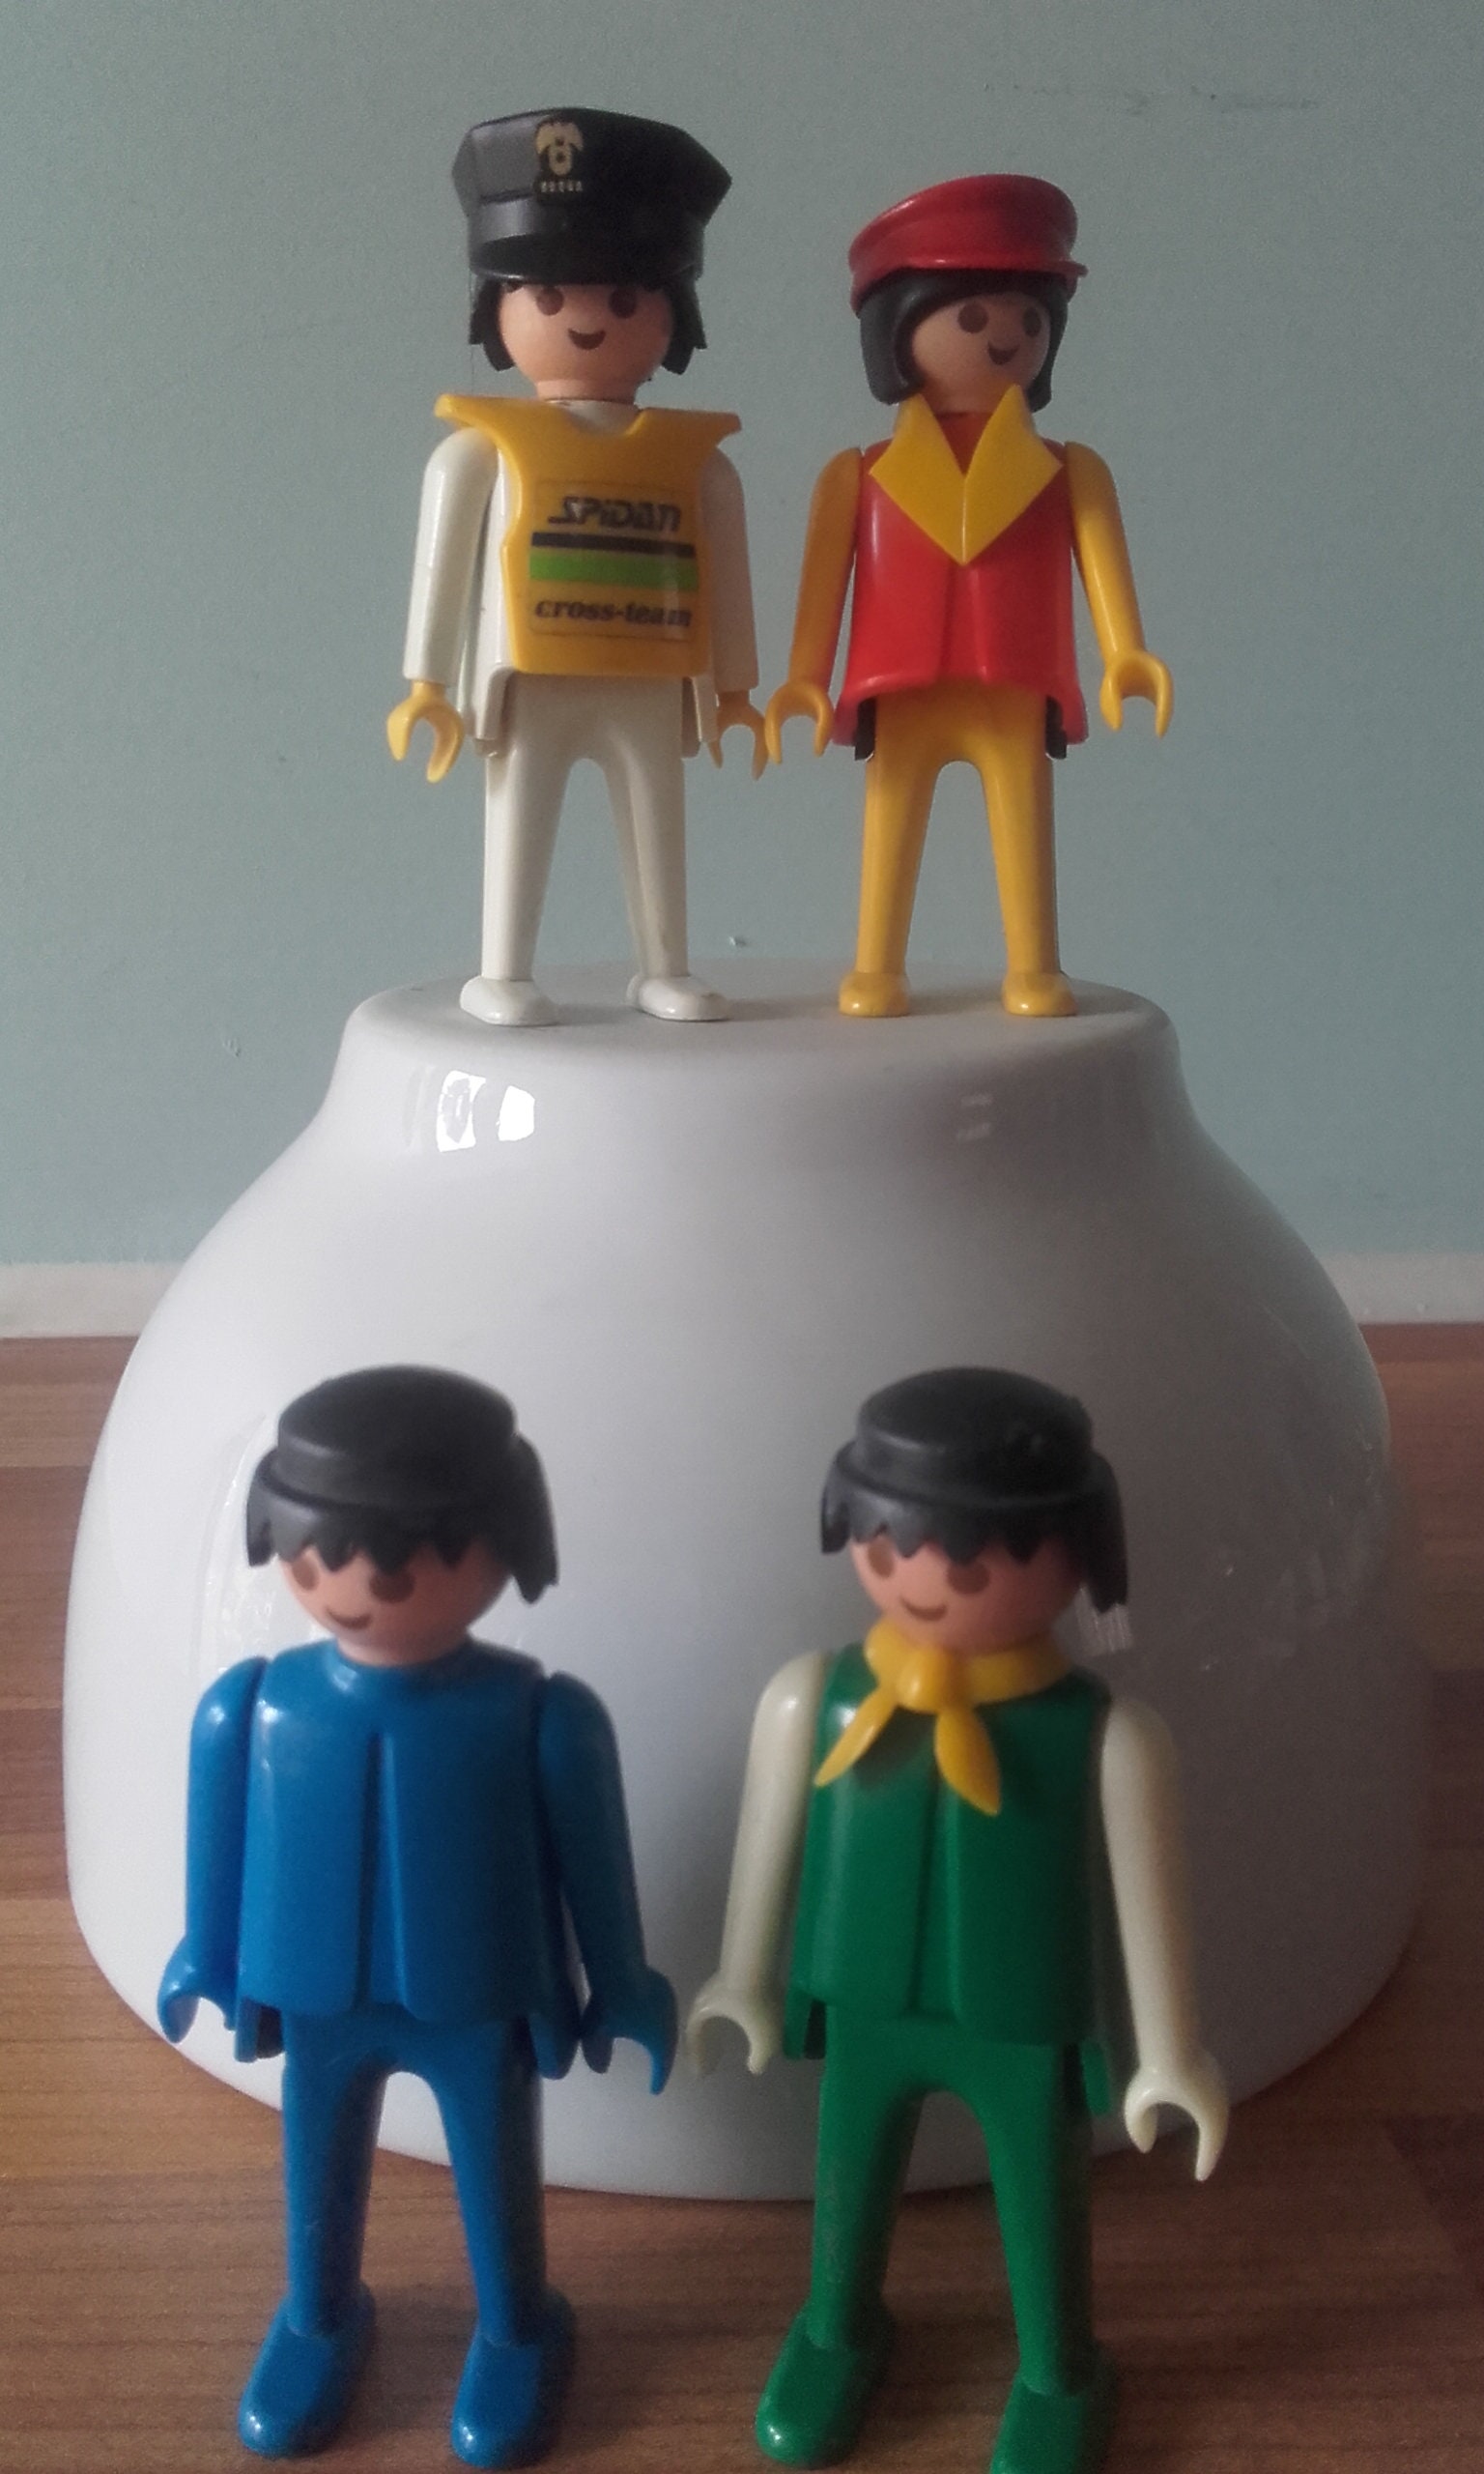 First Series 1974 Vintage Orange Cape with Raised Crest Details about   Playmobil System 